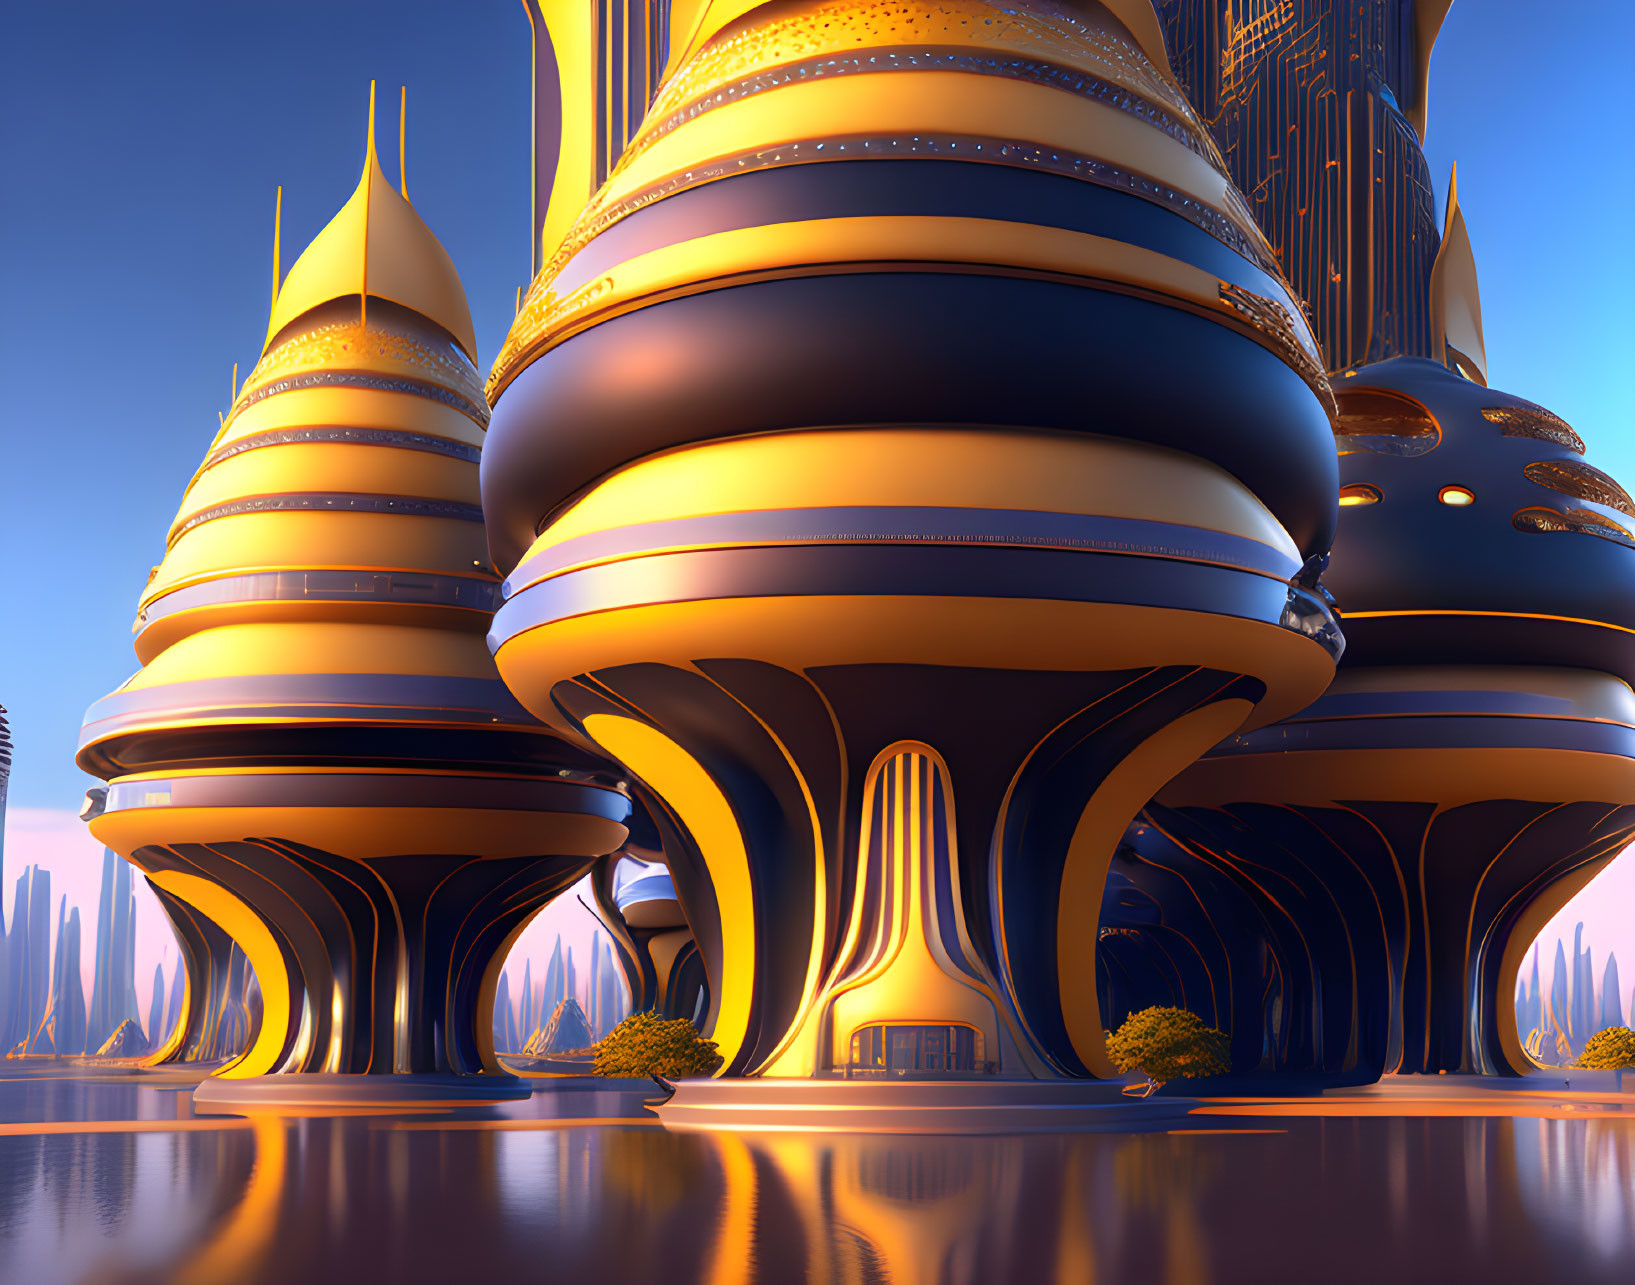 Sleek futuristic cityscape with golden accents and curved buildings at dusk